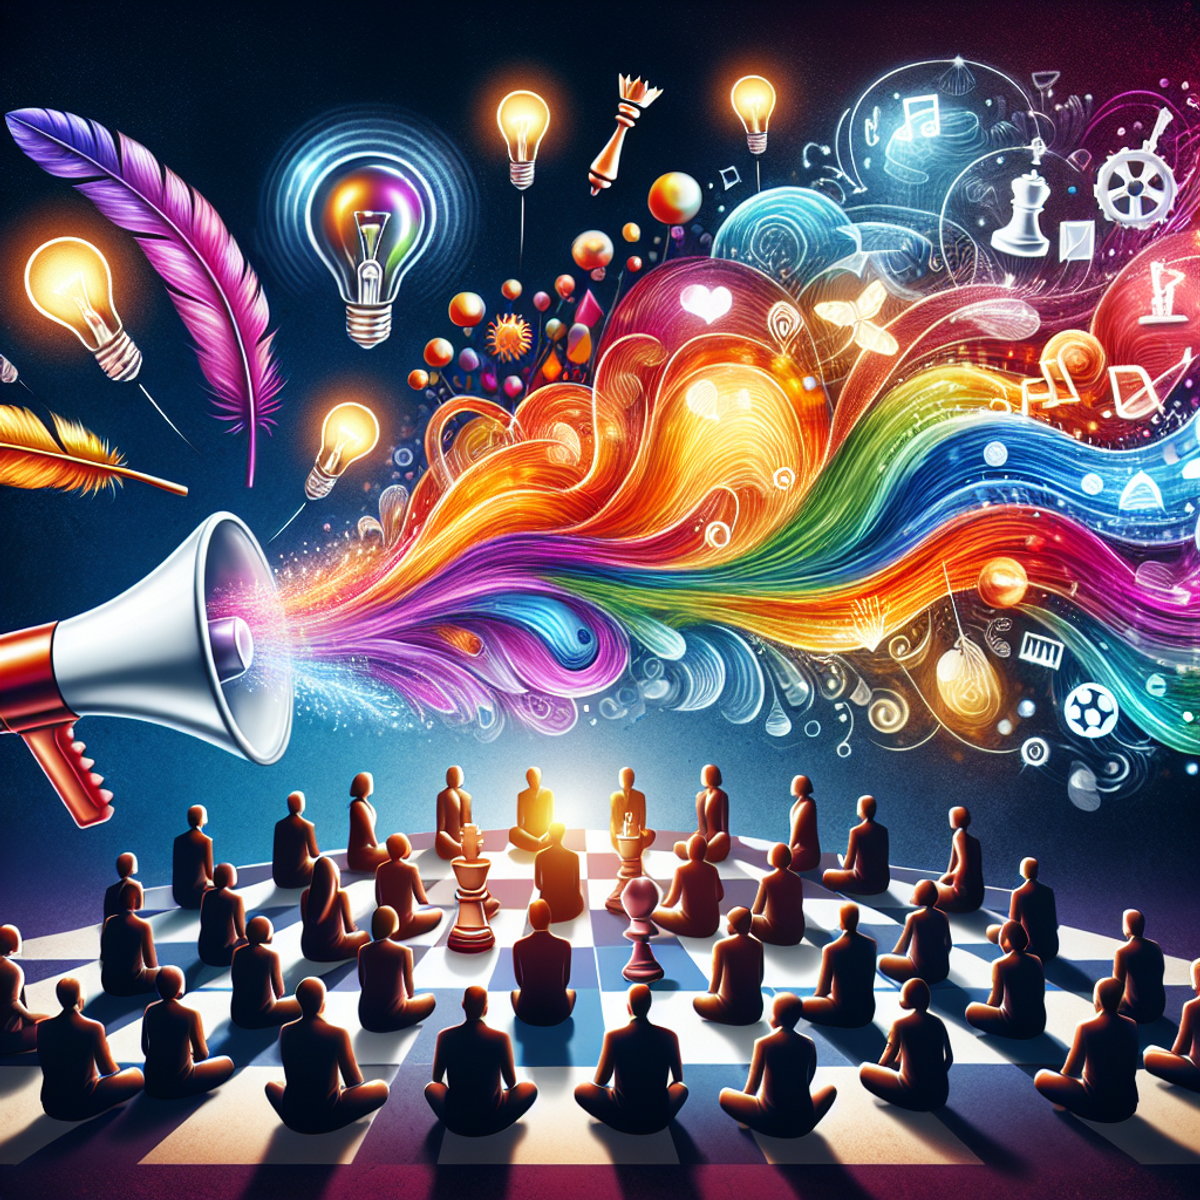 A shiny megaphone delivers colorful waves to an attentive crowd of people, with glowing light bulbs above their heads. A feathered quill, chess piece, and bridge represent finesse, strategy, and bridging the gap in PR writing.